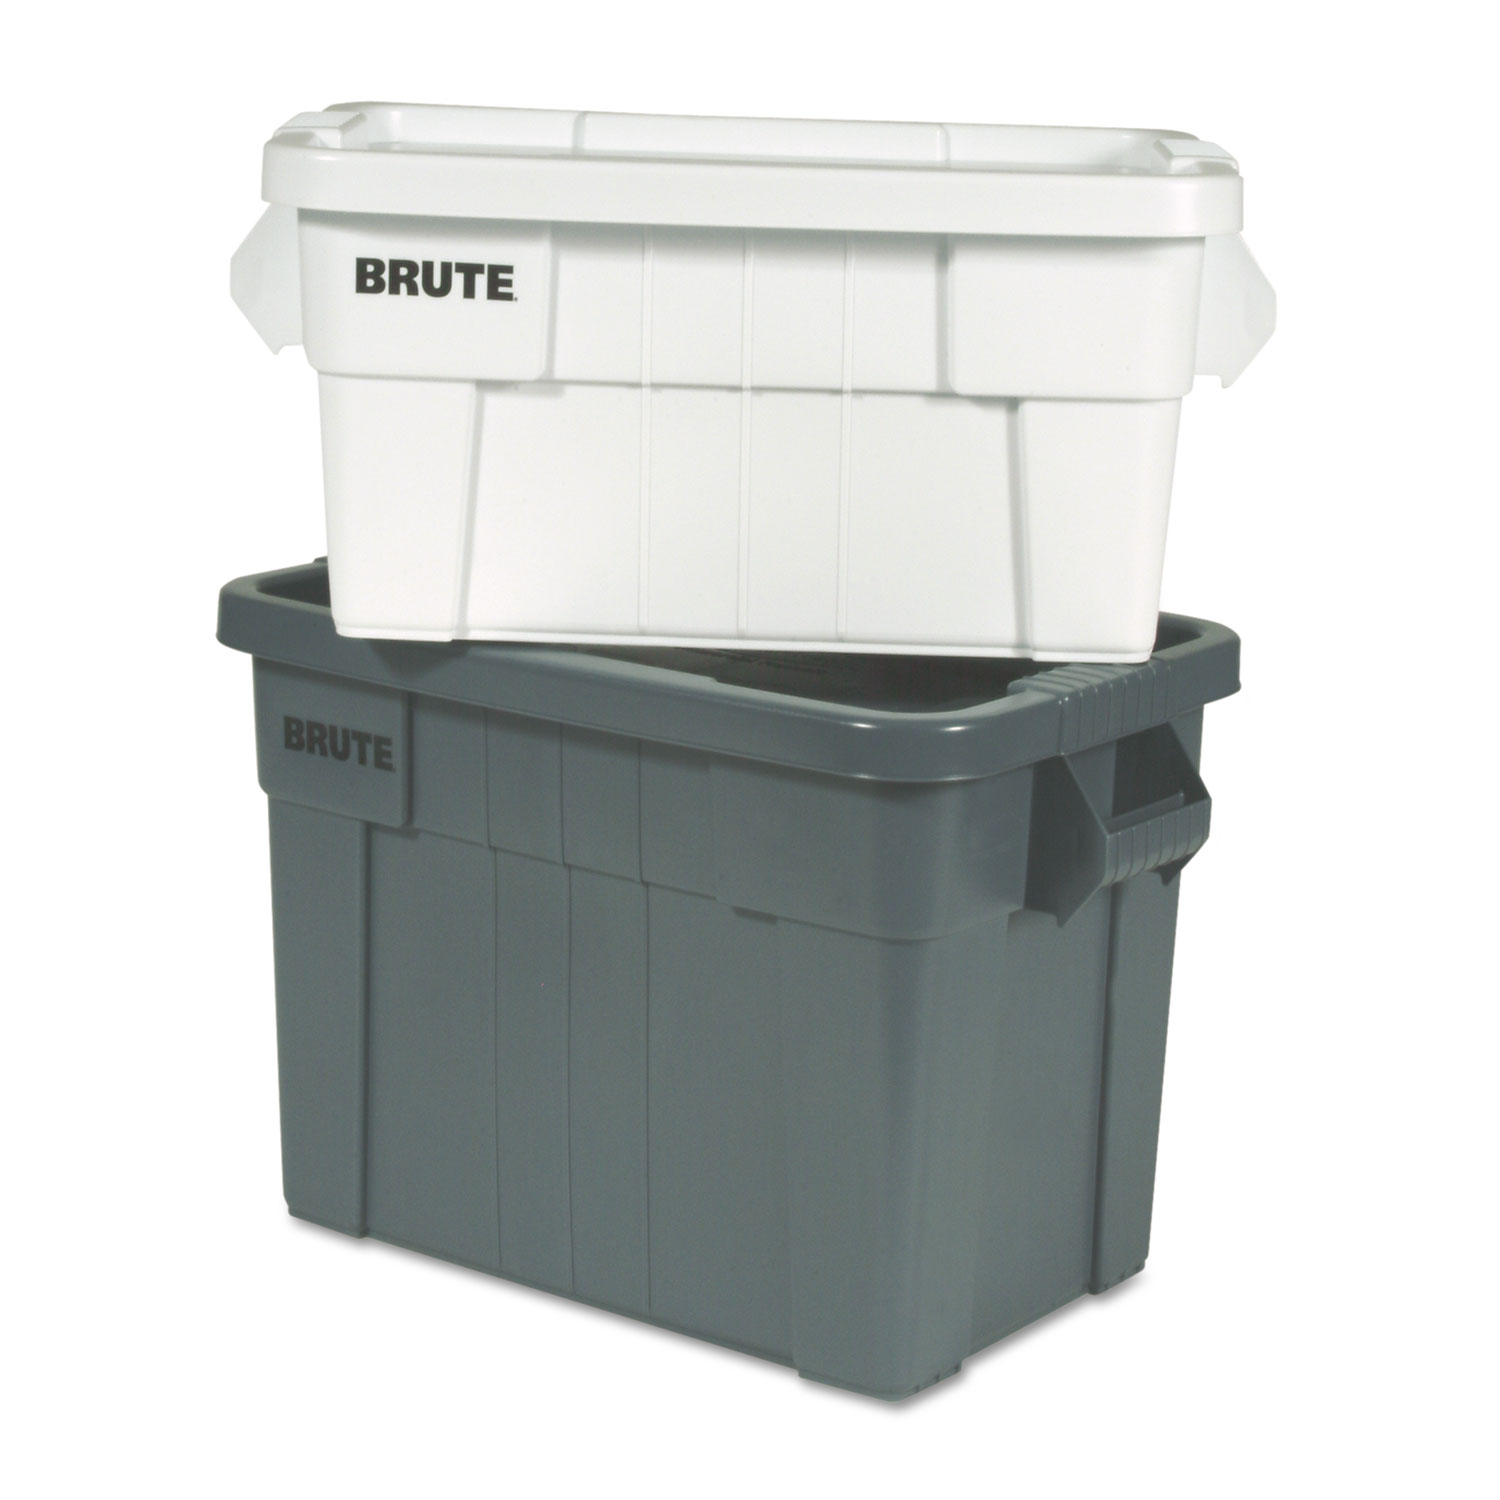  Rubbermaid Commercial FG9S3100GRAY Brute Tote Box, 20gal,Gray (RCP9S31GRAEA) 